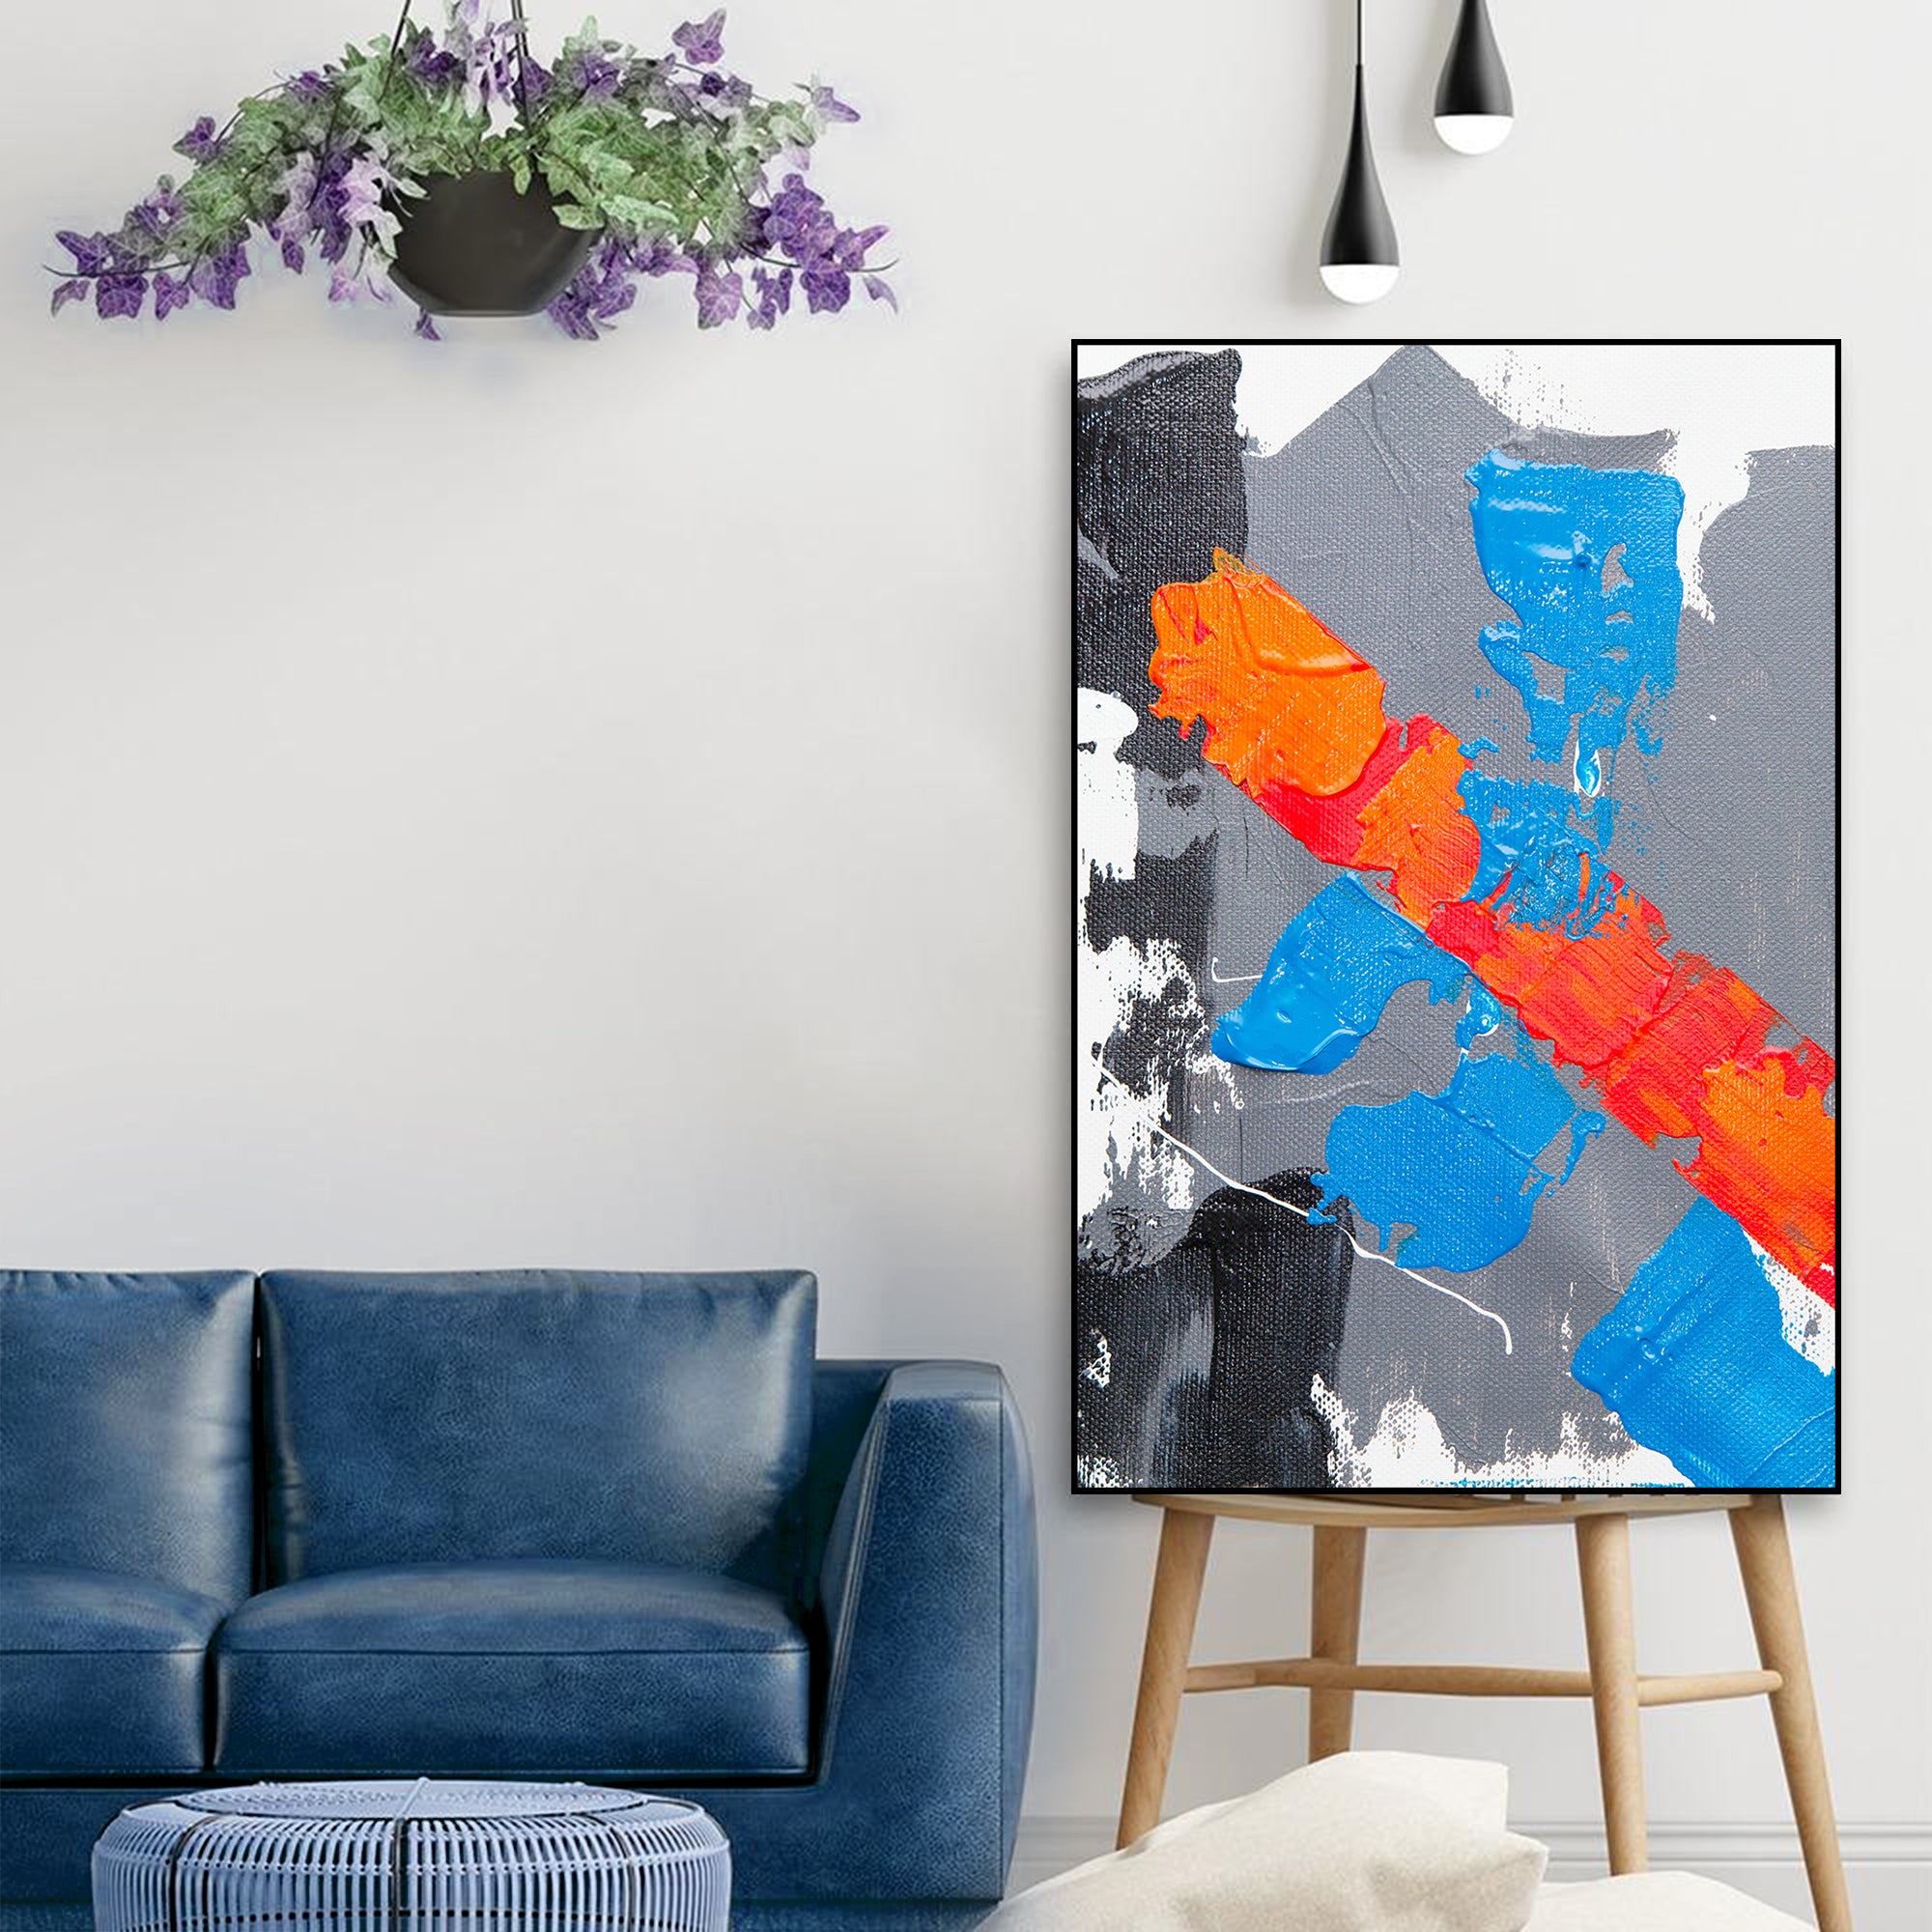  Abstract Art Floating Canvas Wall Painting